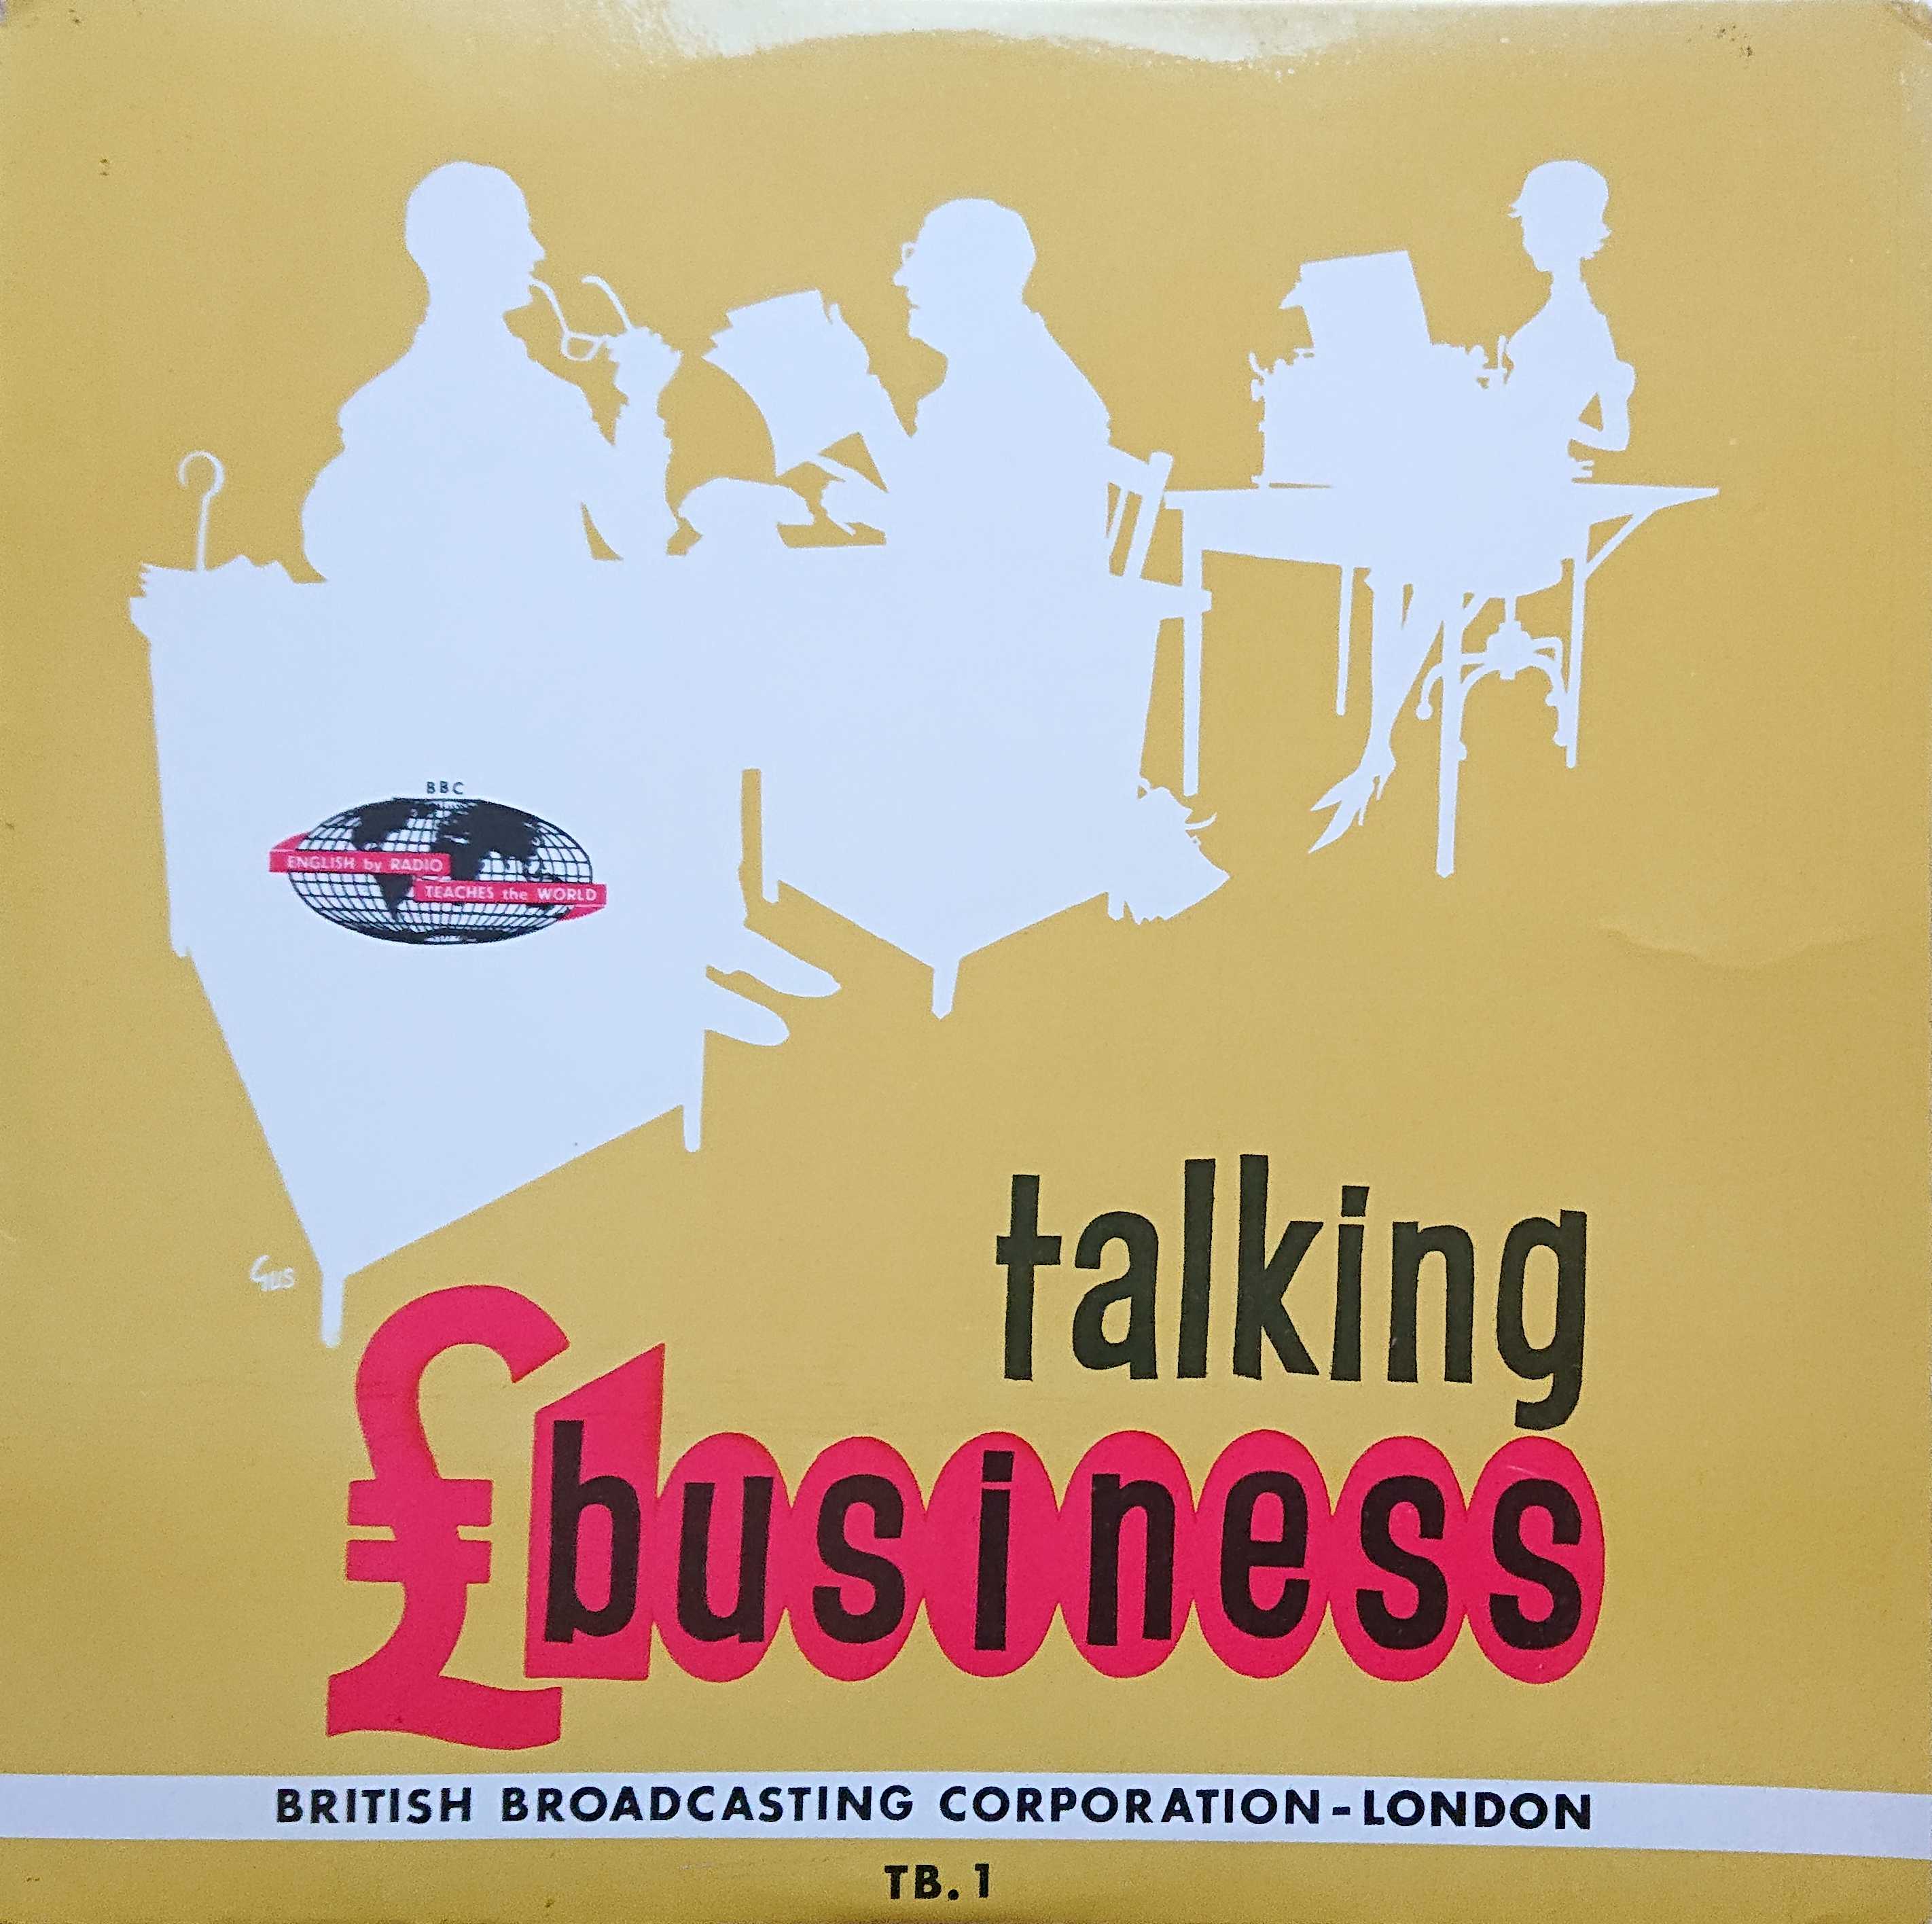 Picture of TB 1 Talking business by artist Michael Innes from the BBC 10inches - Records and Tapes library